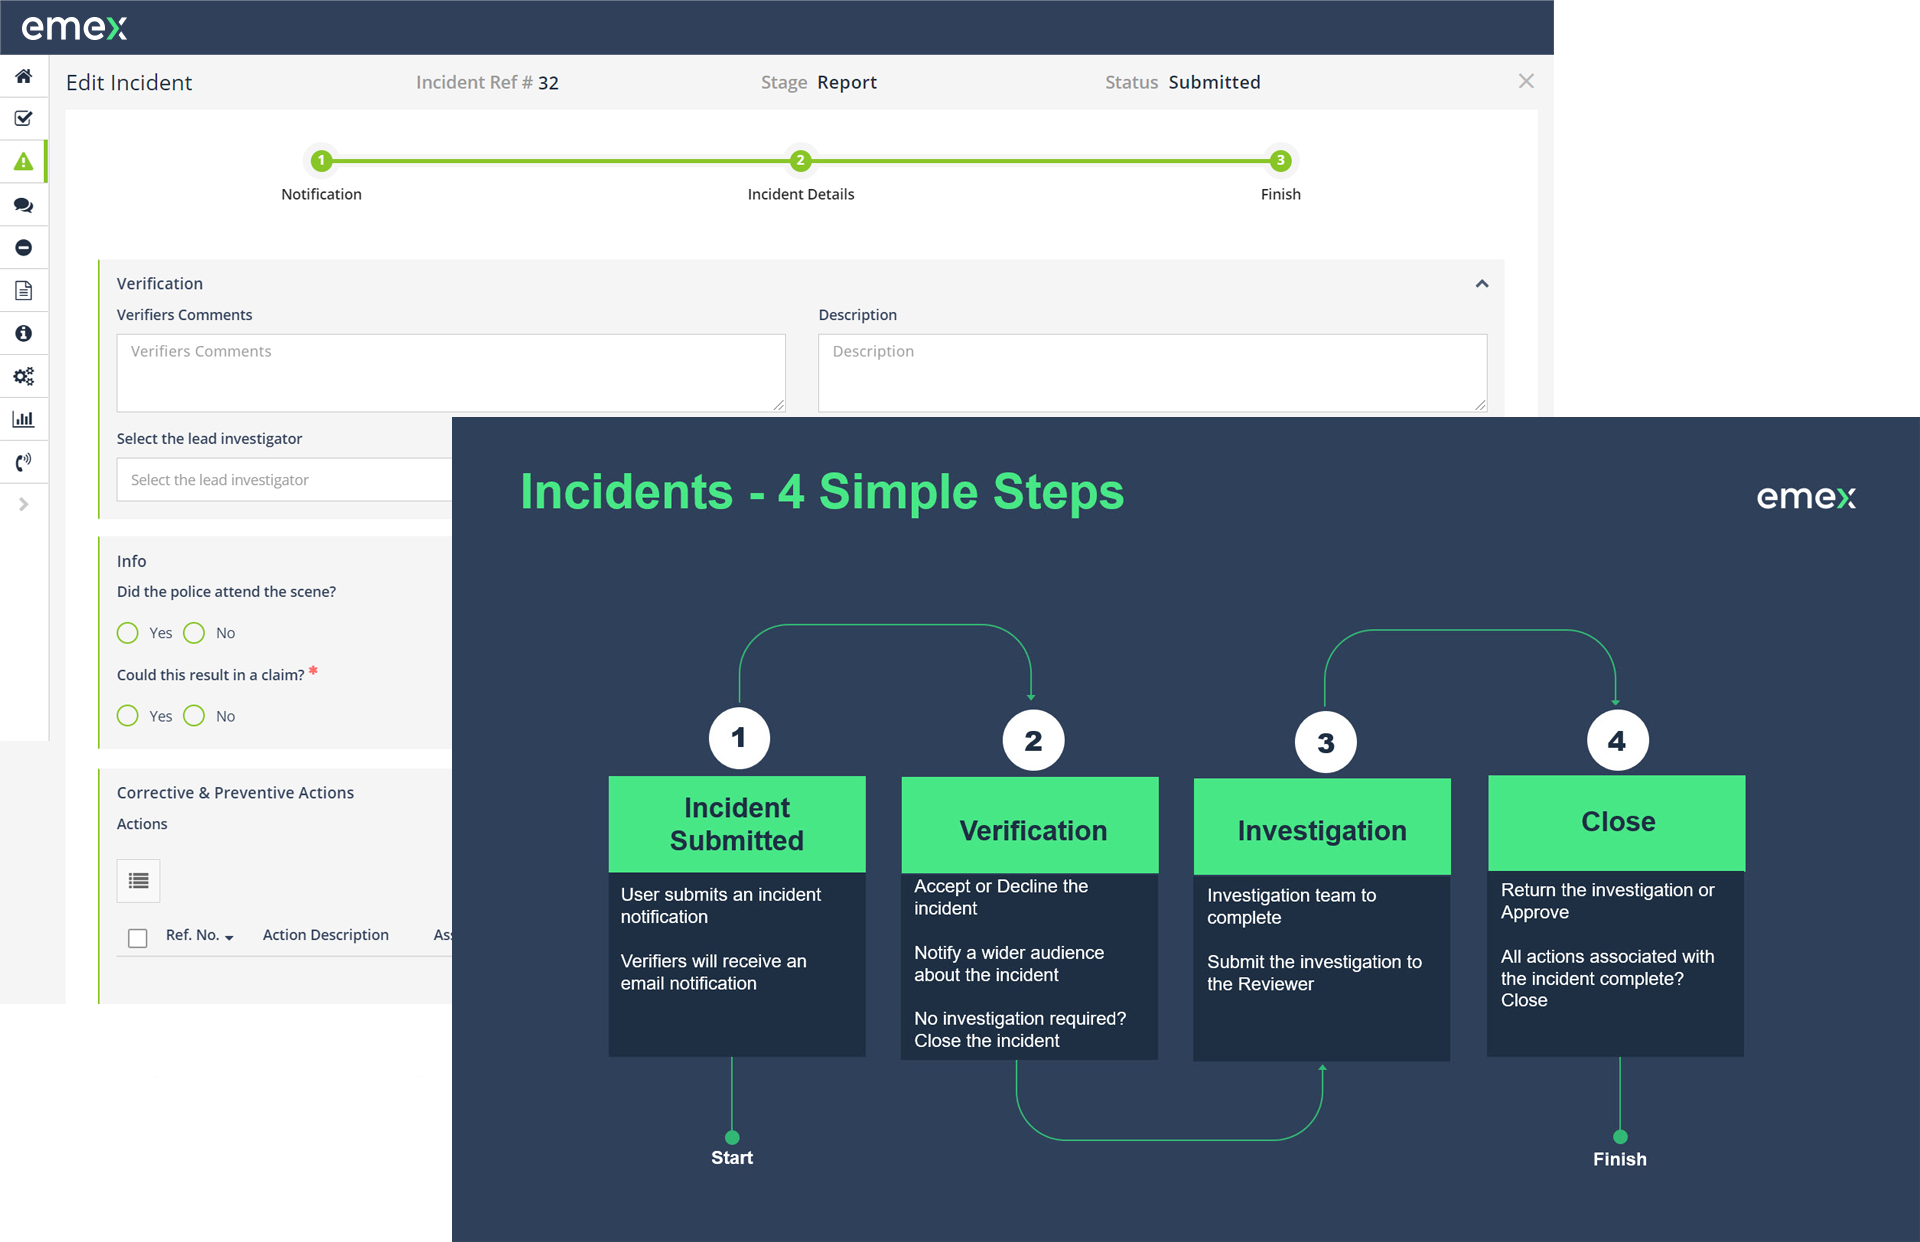 Manage incident lifecycle from open through to close out to ensure everything is completed from start to finish.